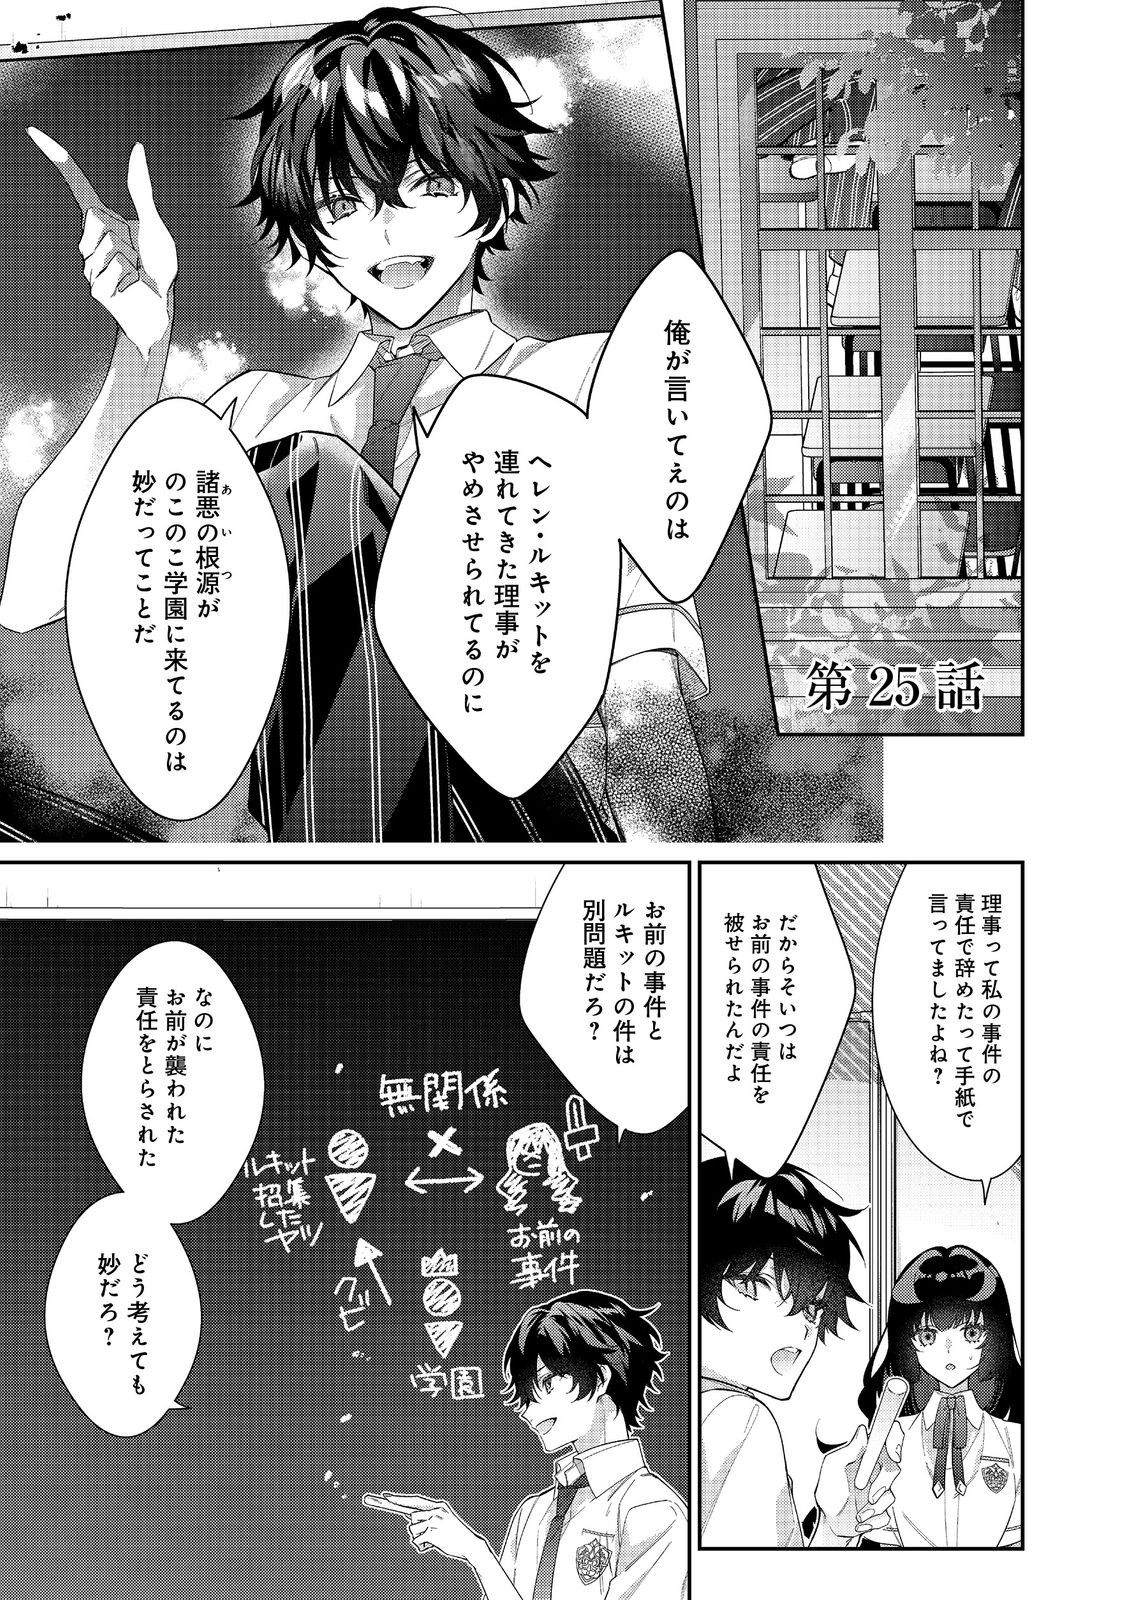 I Was Reincarnated As The Villainess In An Otome Game But The Boys Love Me Anyway! - Chapter 25.1 - Page 1